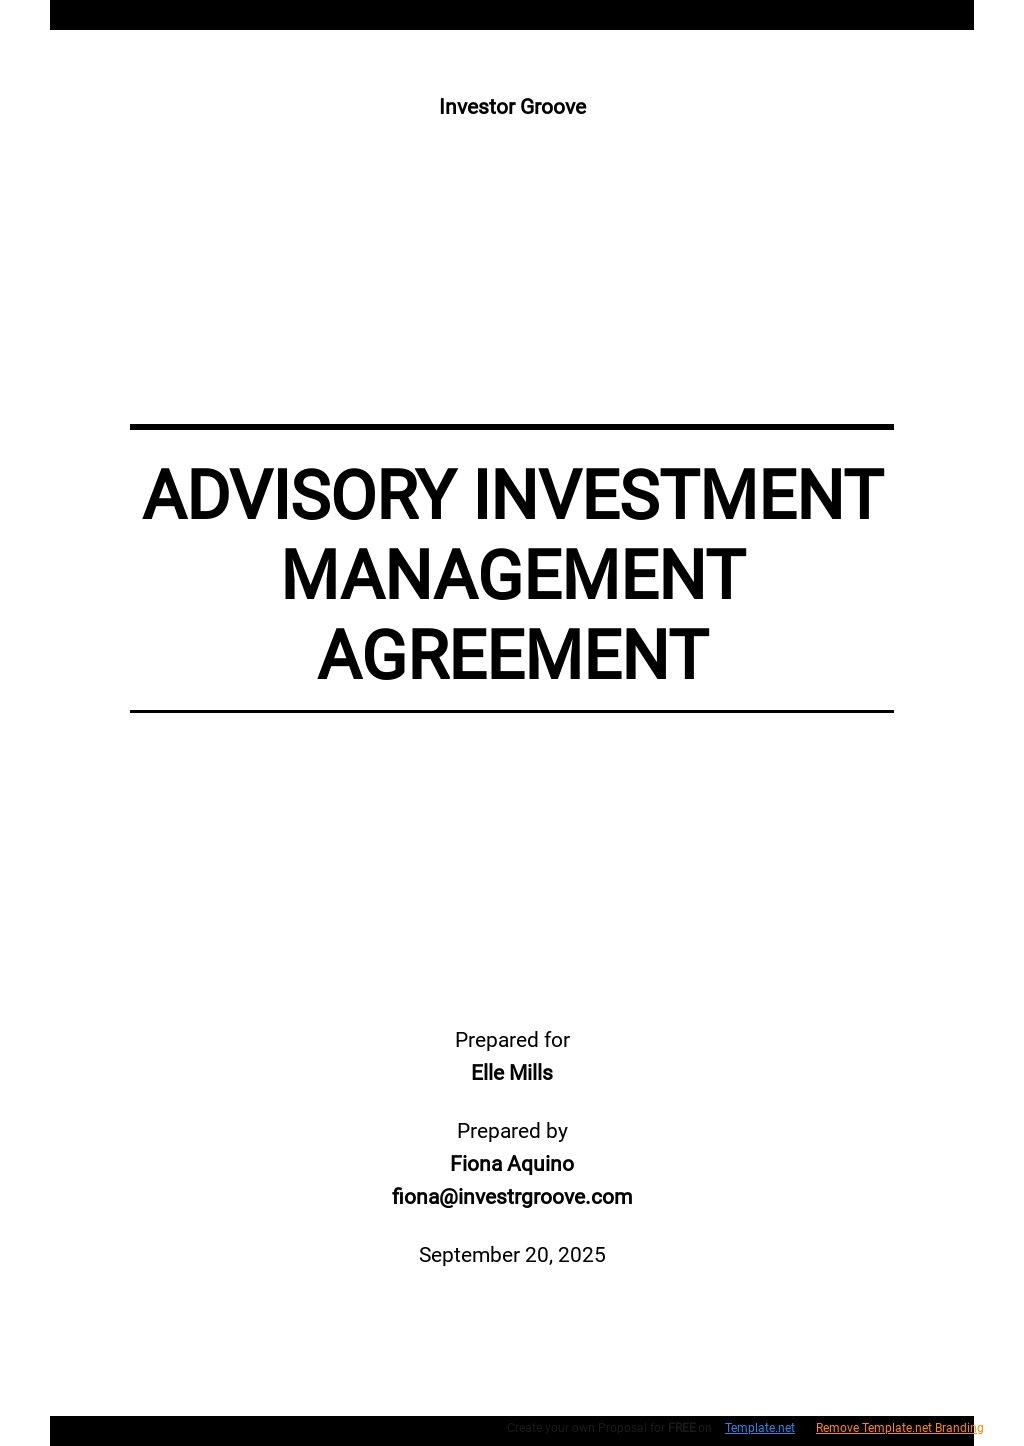 Free Advisory Investment Management Agreement Template